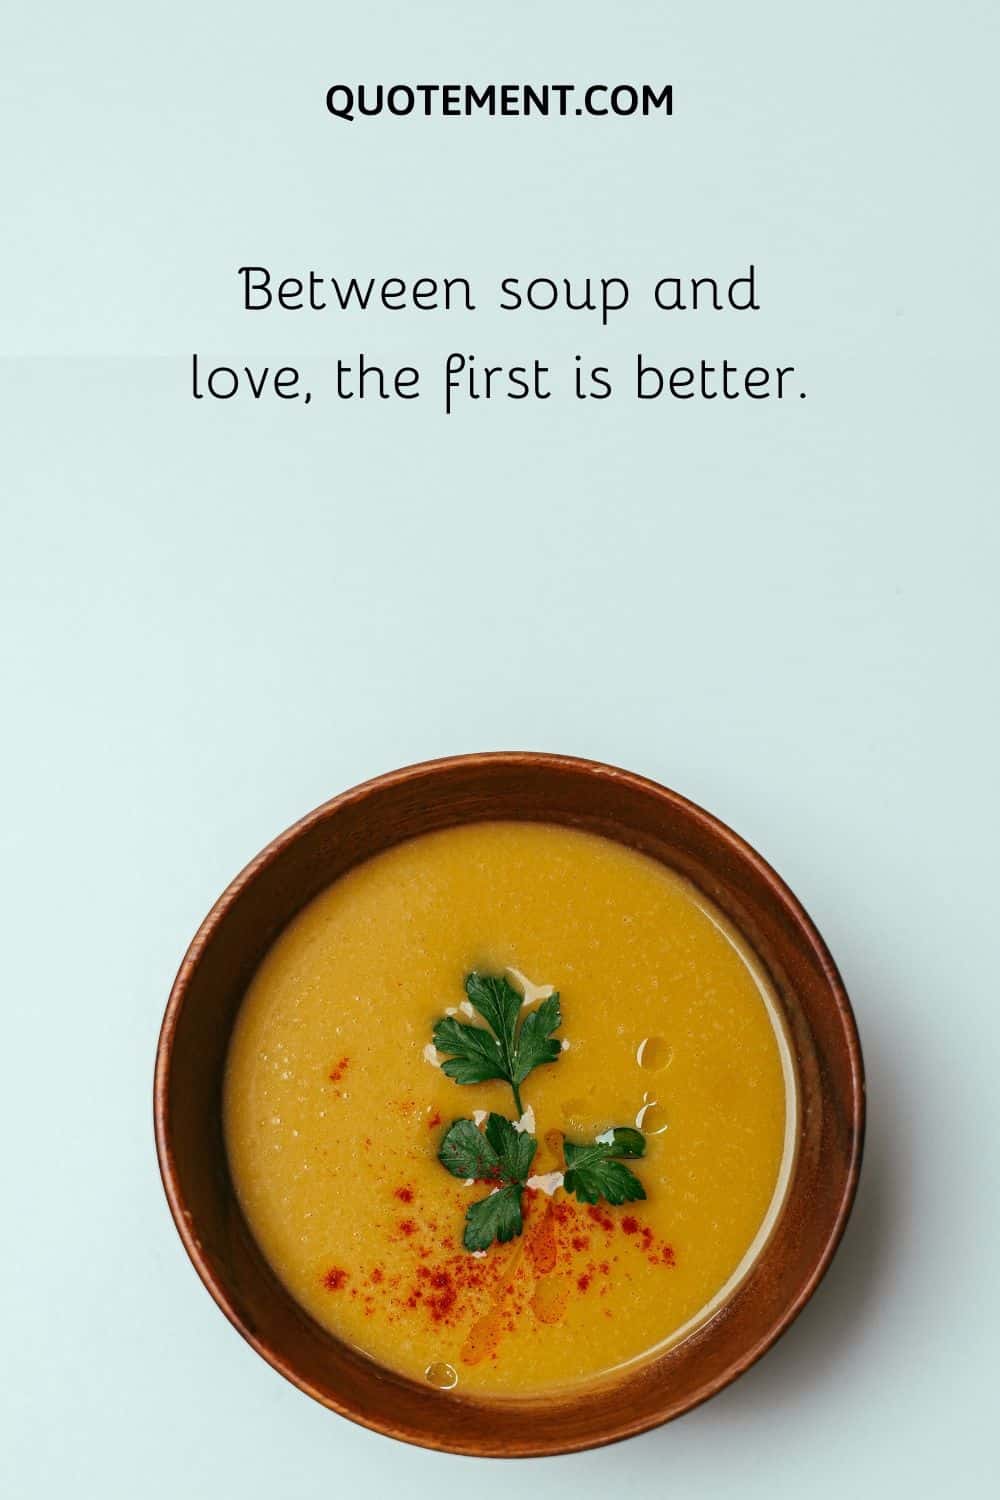 Between soup and love, the first is better